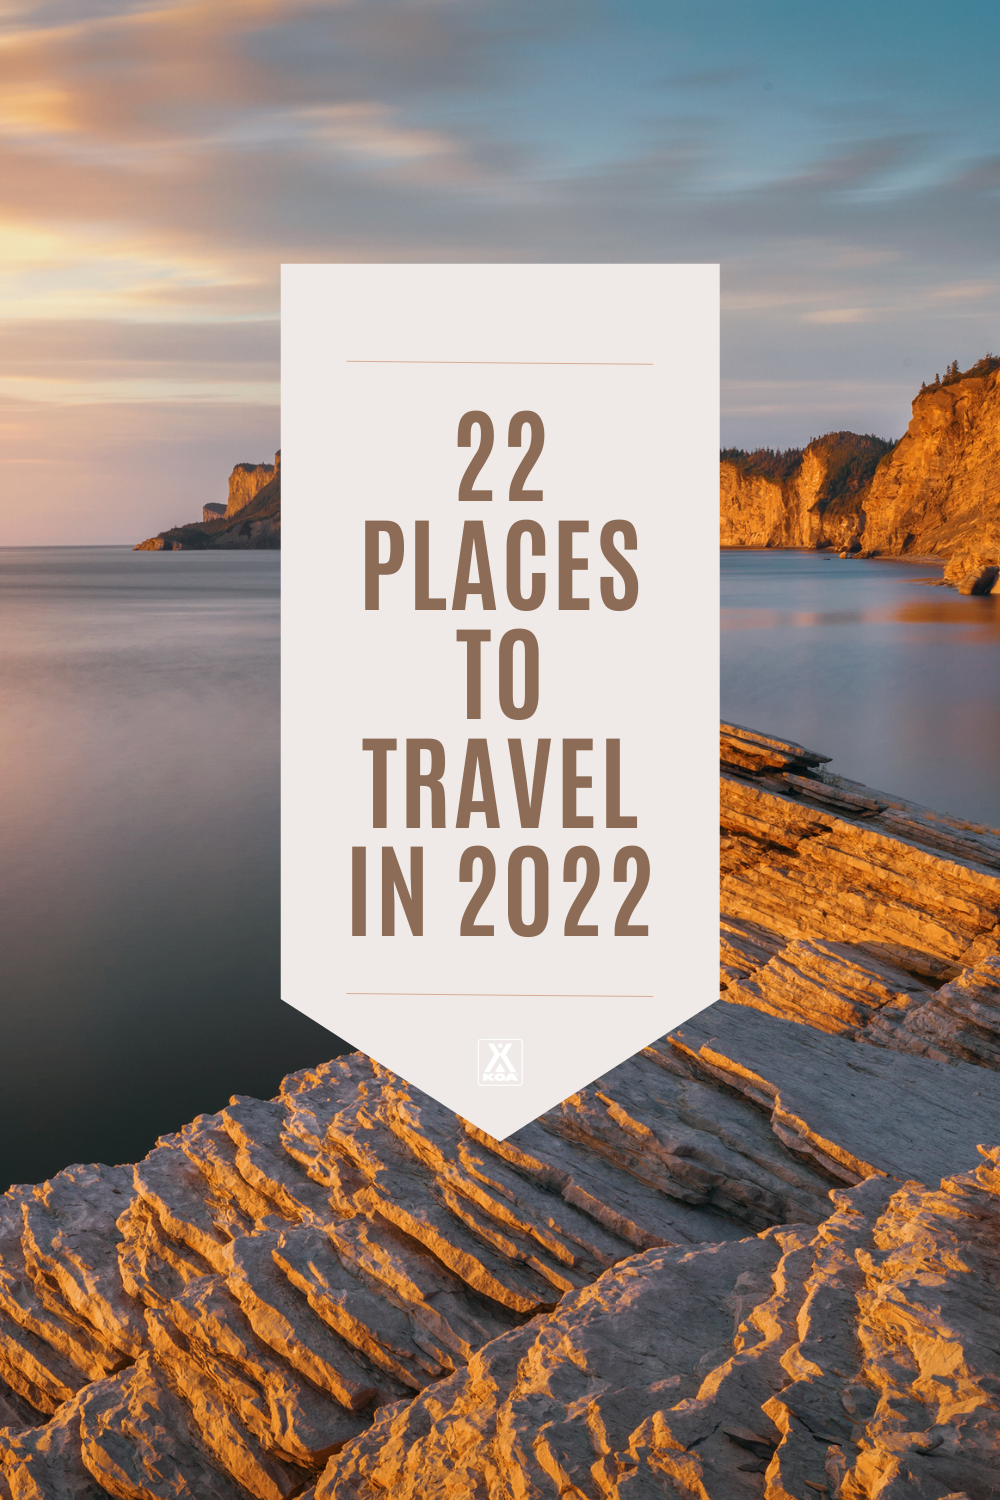 Looking for somewhere new to go this year? From quirky mountain towns to underrated national parks, artsy cities, island getaways, and theme parks, these are 22 places you need to visit in 2022.